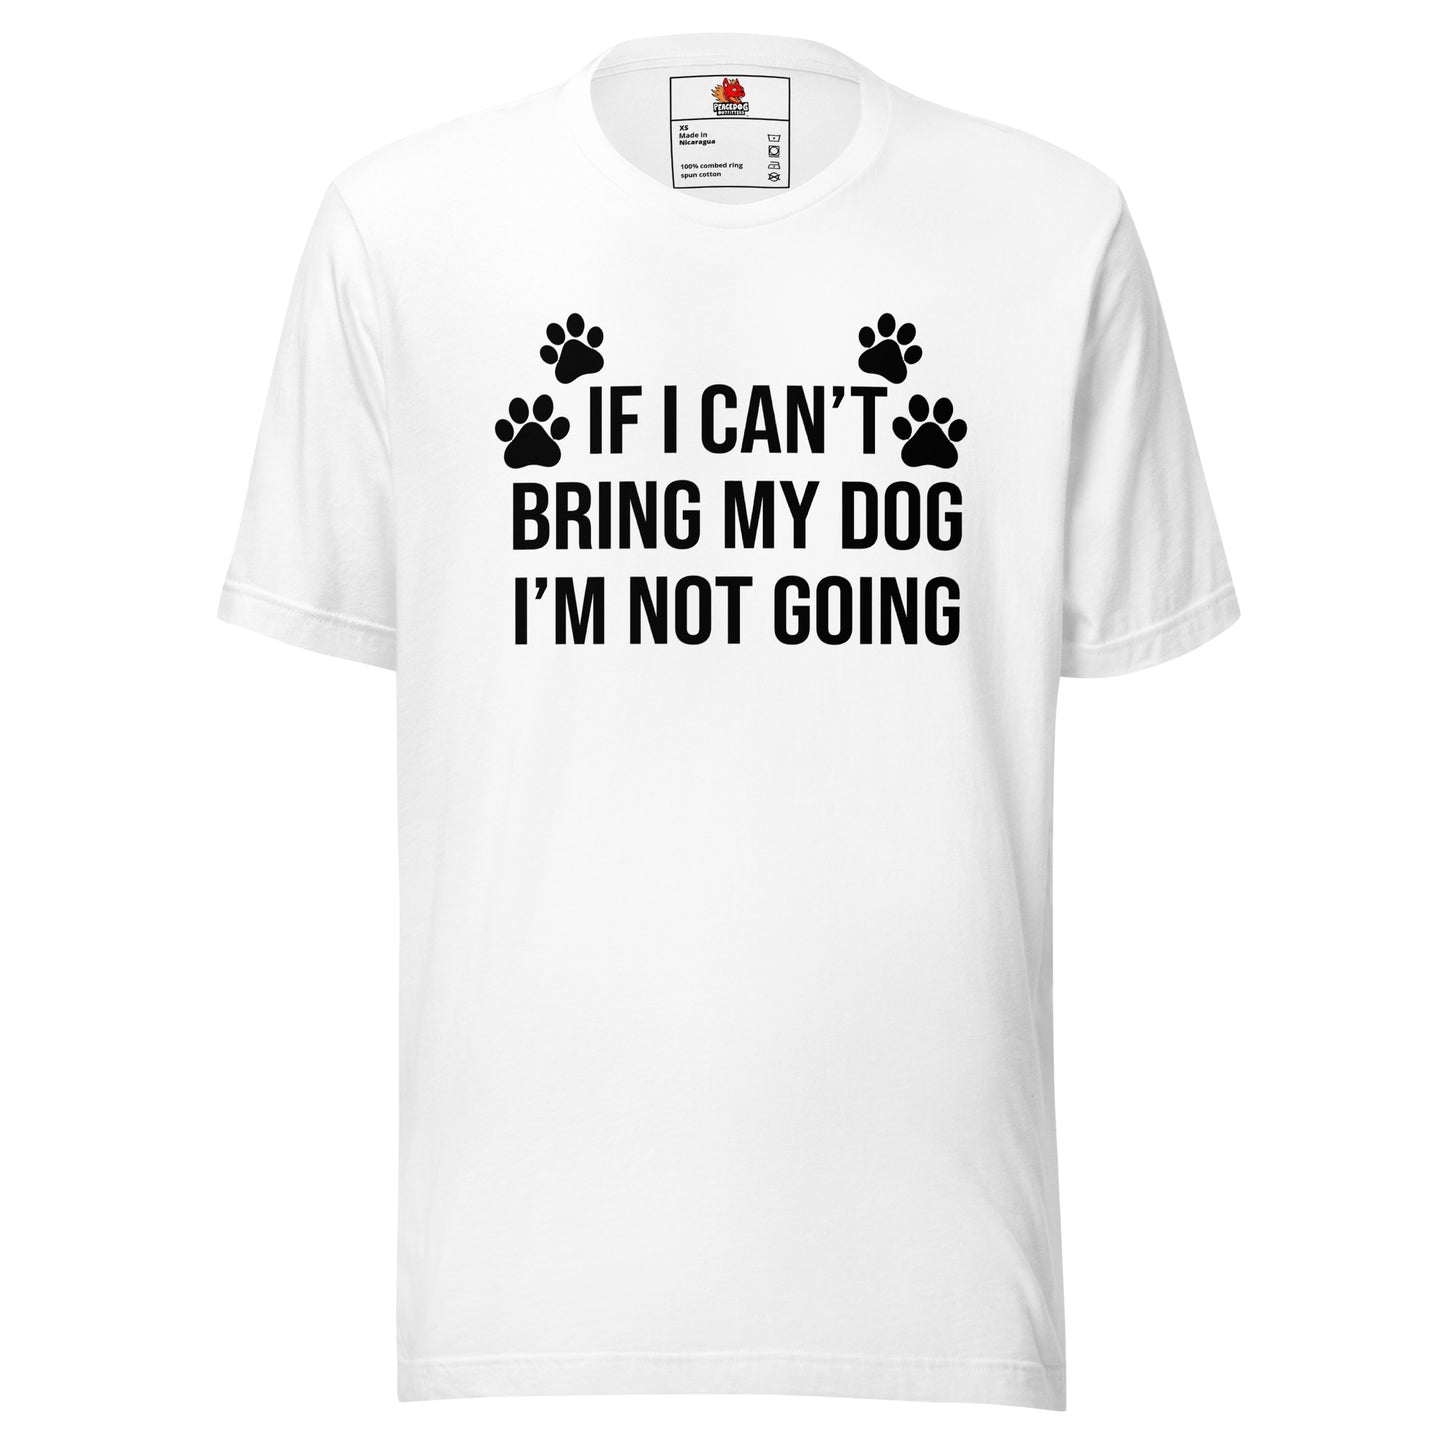 If I Can't Bring My Dog, I'm Not Going T-shirt